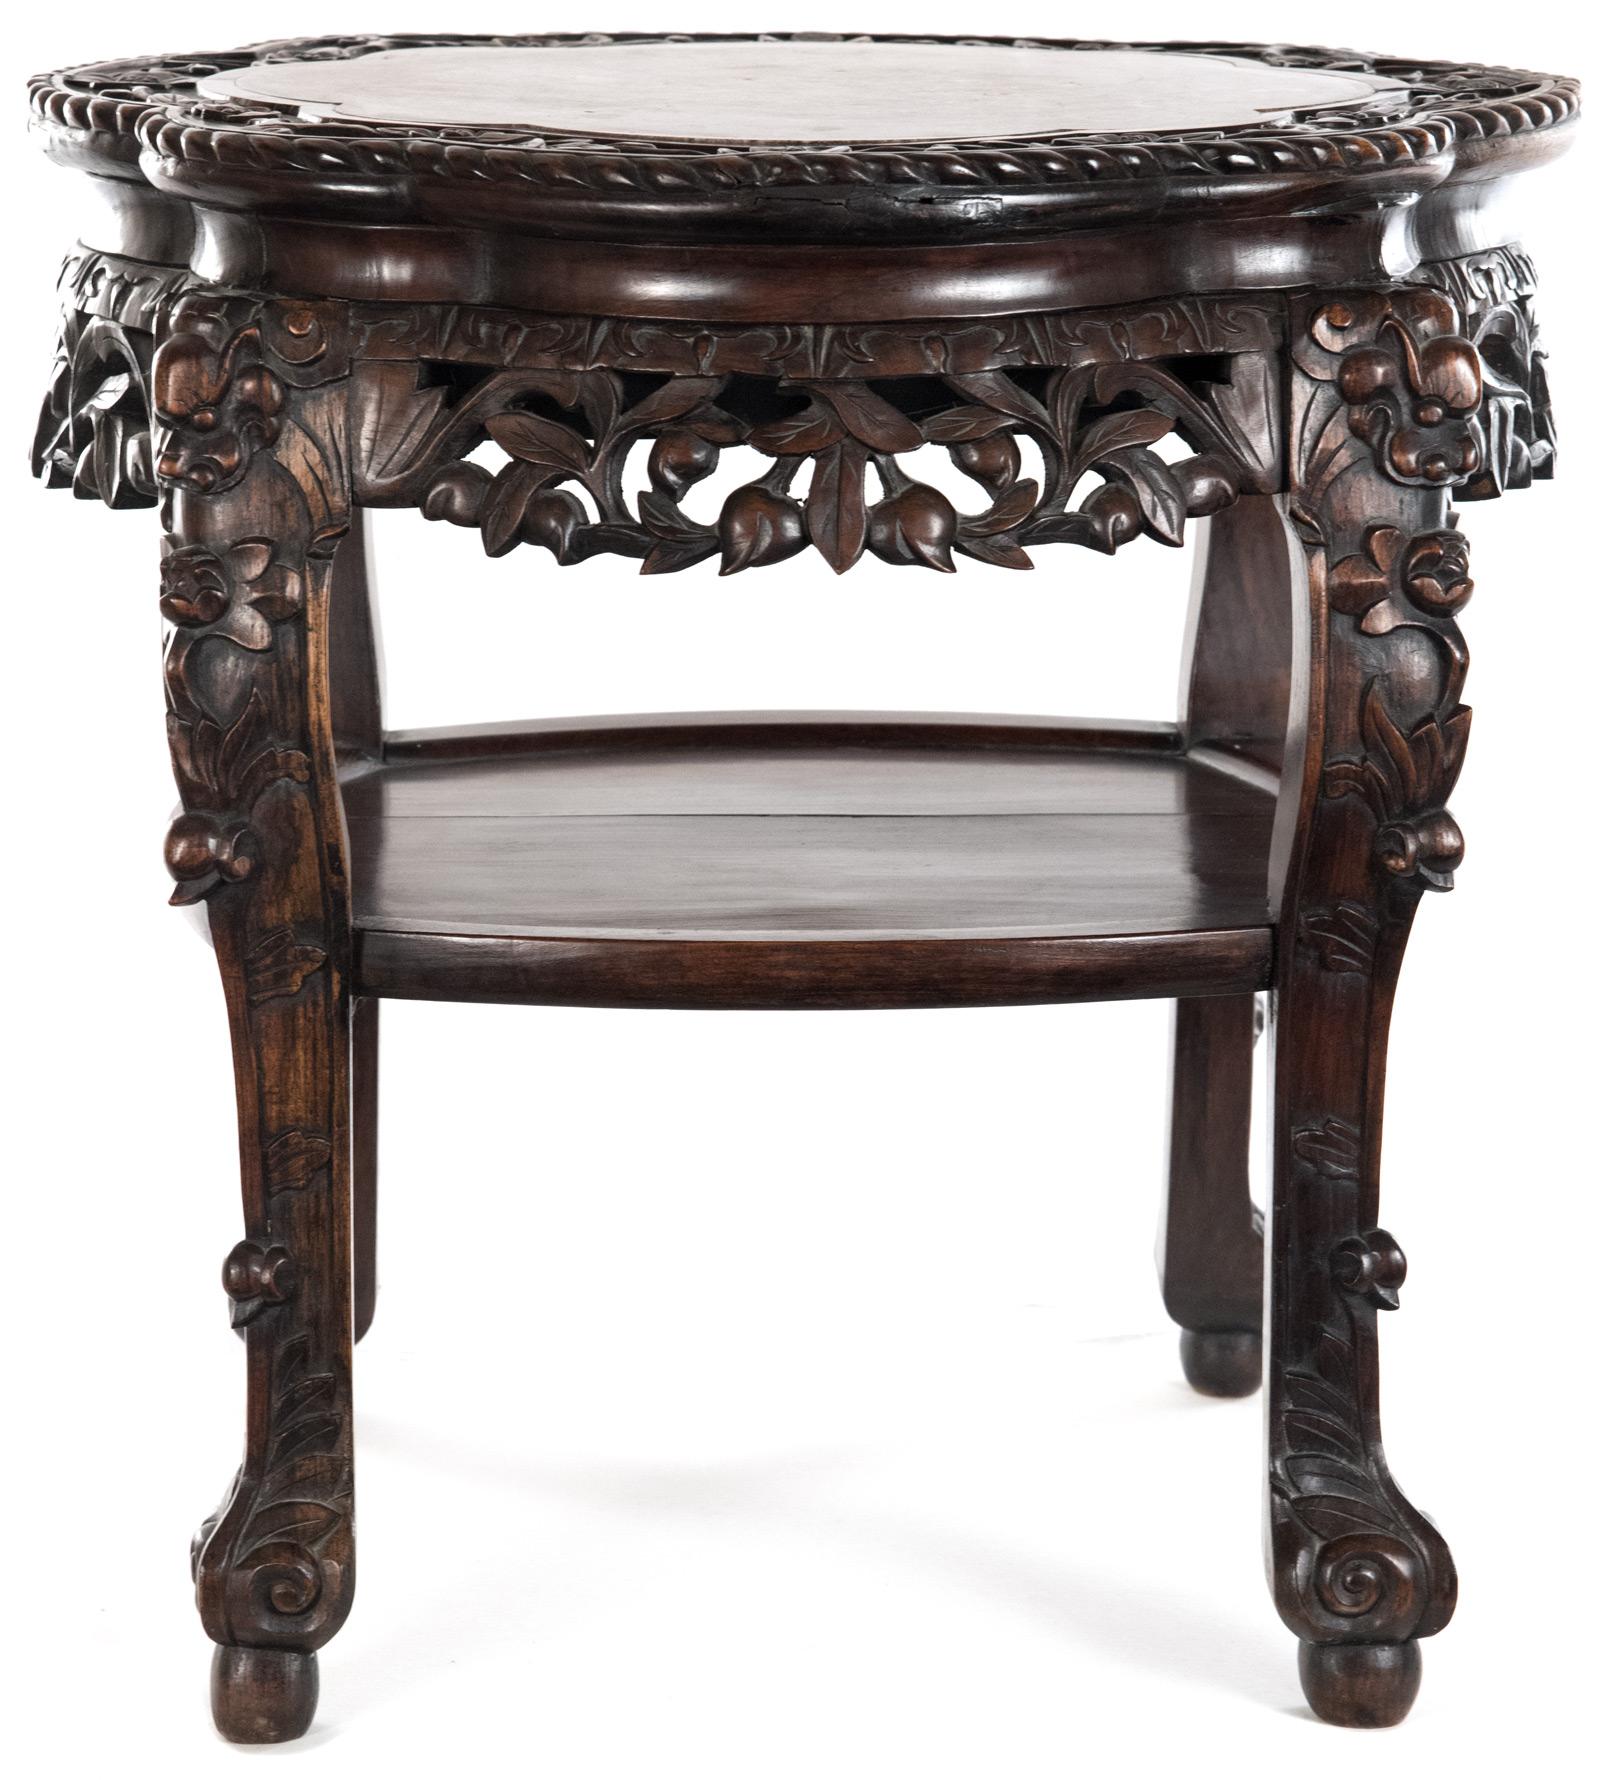 A Chinese captured-top table inset with a scalloped cartouche-shaped marble top bordered by a conforming carved edge with raised blossoming branch motif decoration, above an richly carved and pierced apron with ornate vine motifs. All raised on